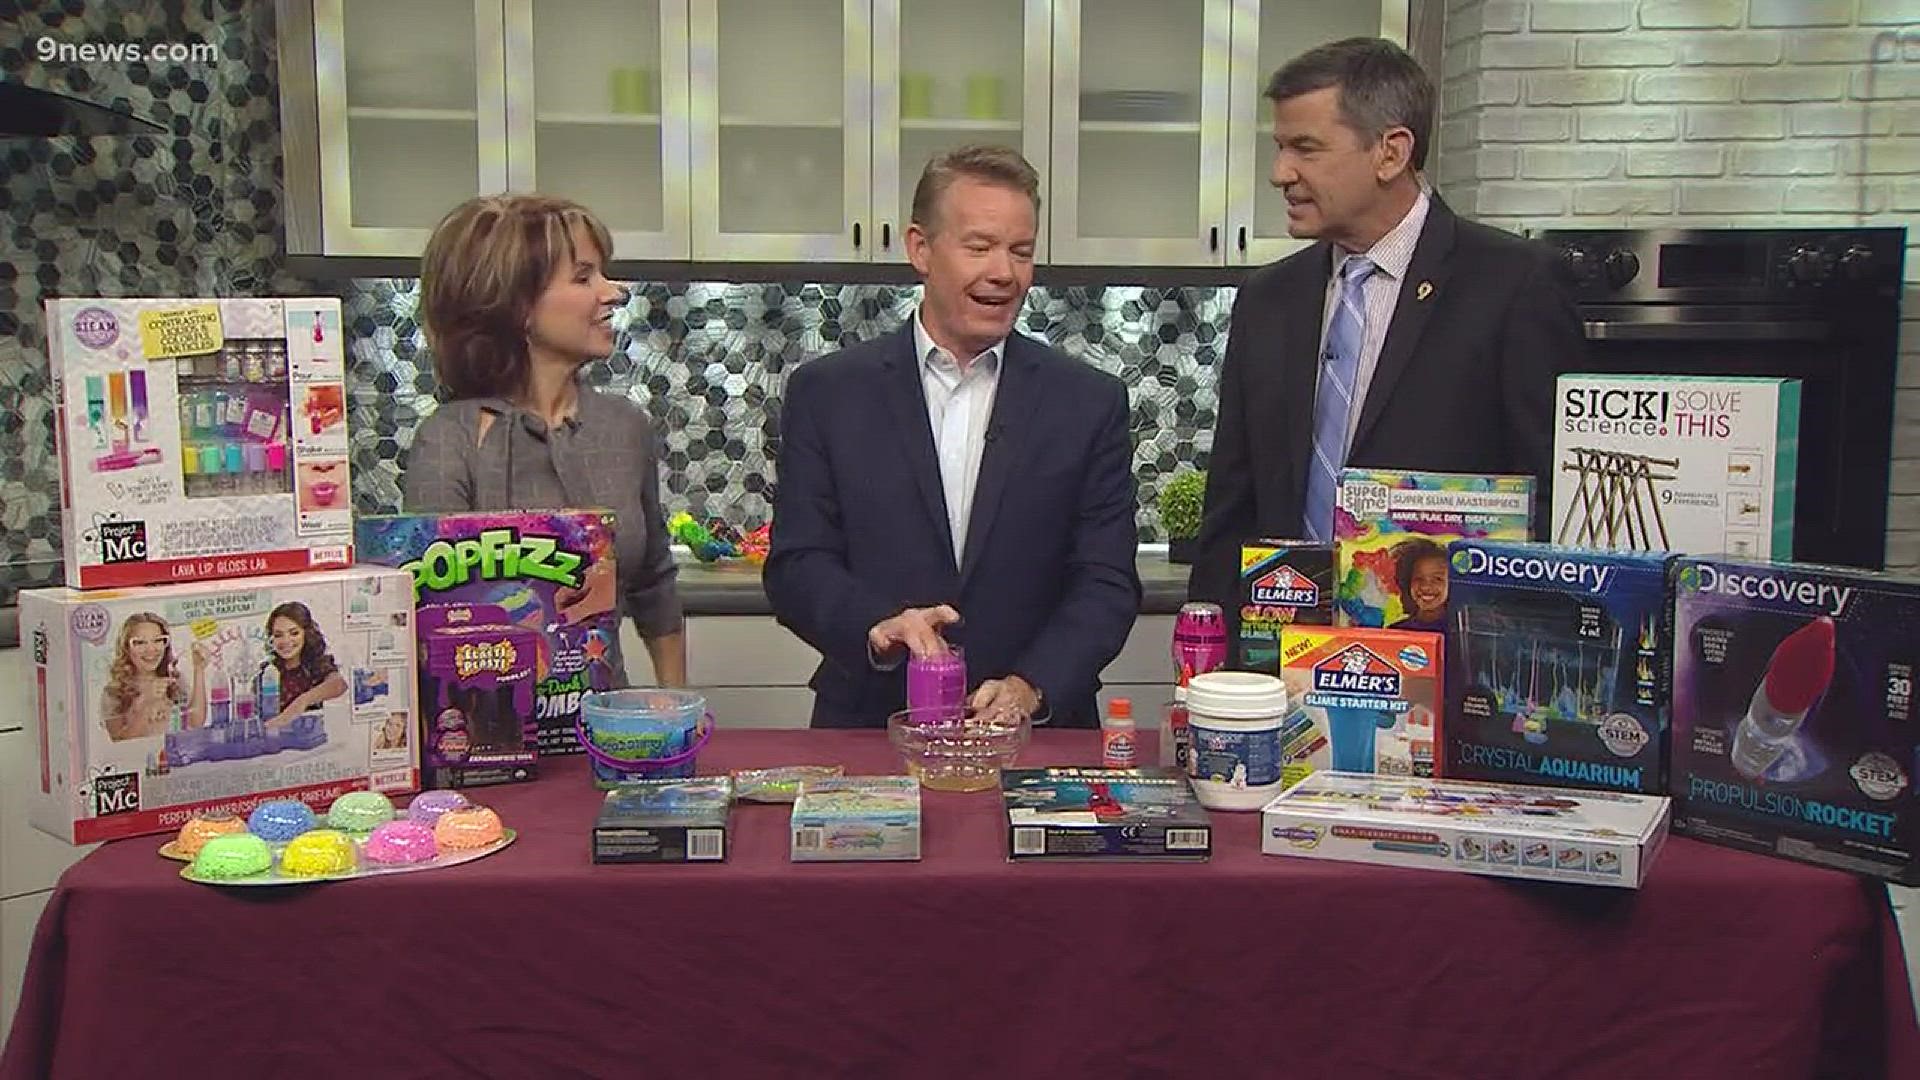 Our science guy Steve Spangler was busy shopping this weekend and he's sharing the trends for this year's top STEM toys. It's all about the science of making an ooey, gooey mess guaranteed to get kids excited about science.